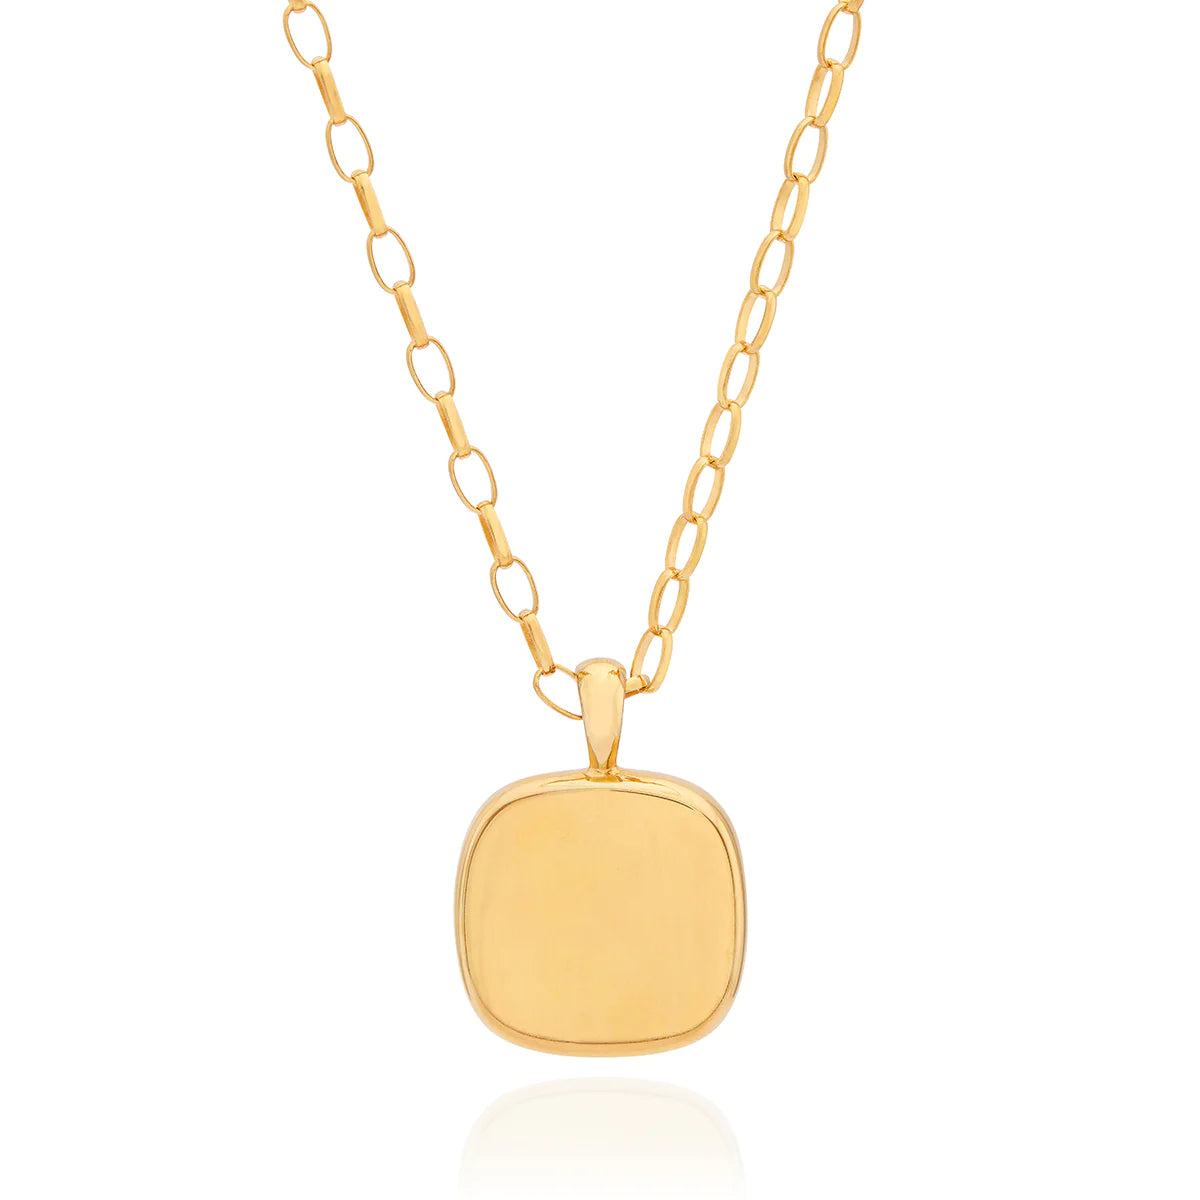 Buffalo stone pendant necklace on a gold plated chain